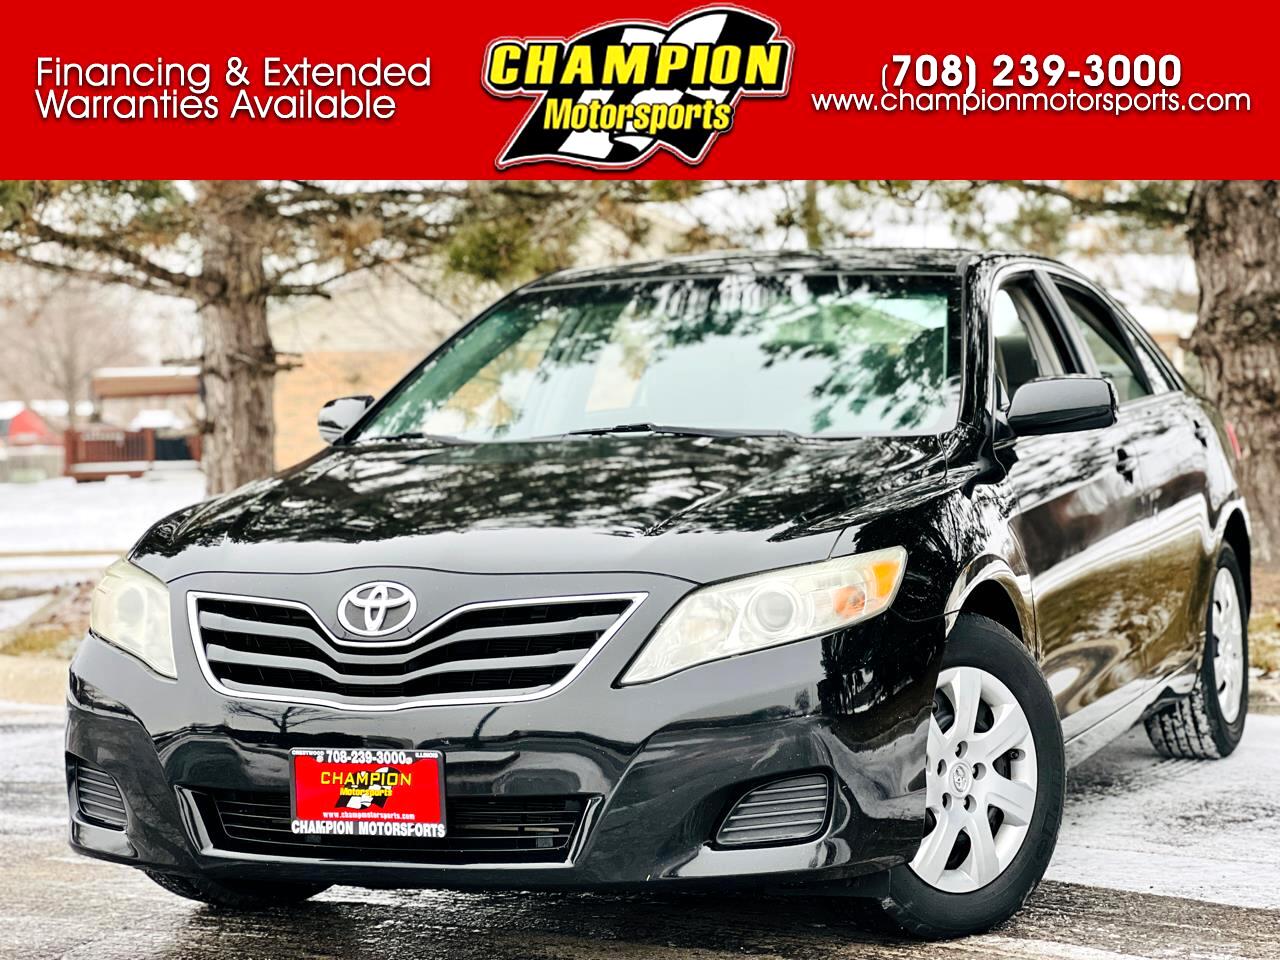 2010 Toyota Camry 4dr Sdn I4 Man LE (Natl)